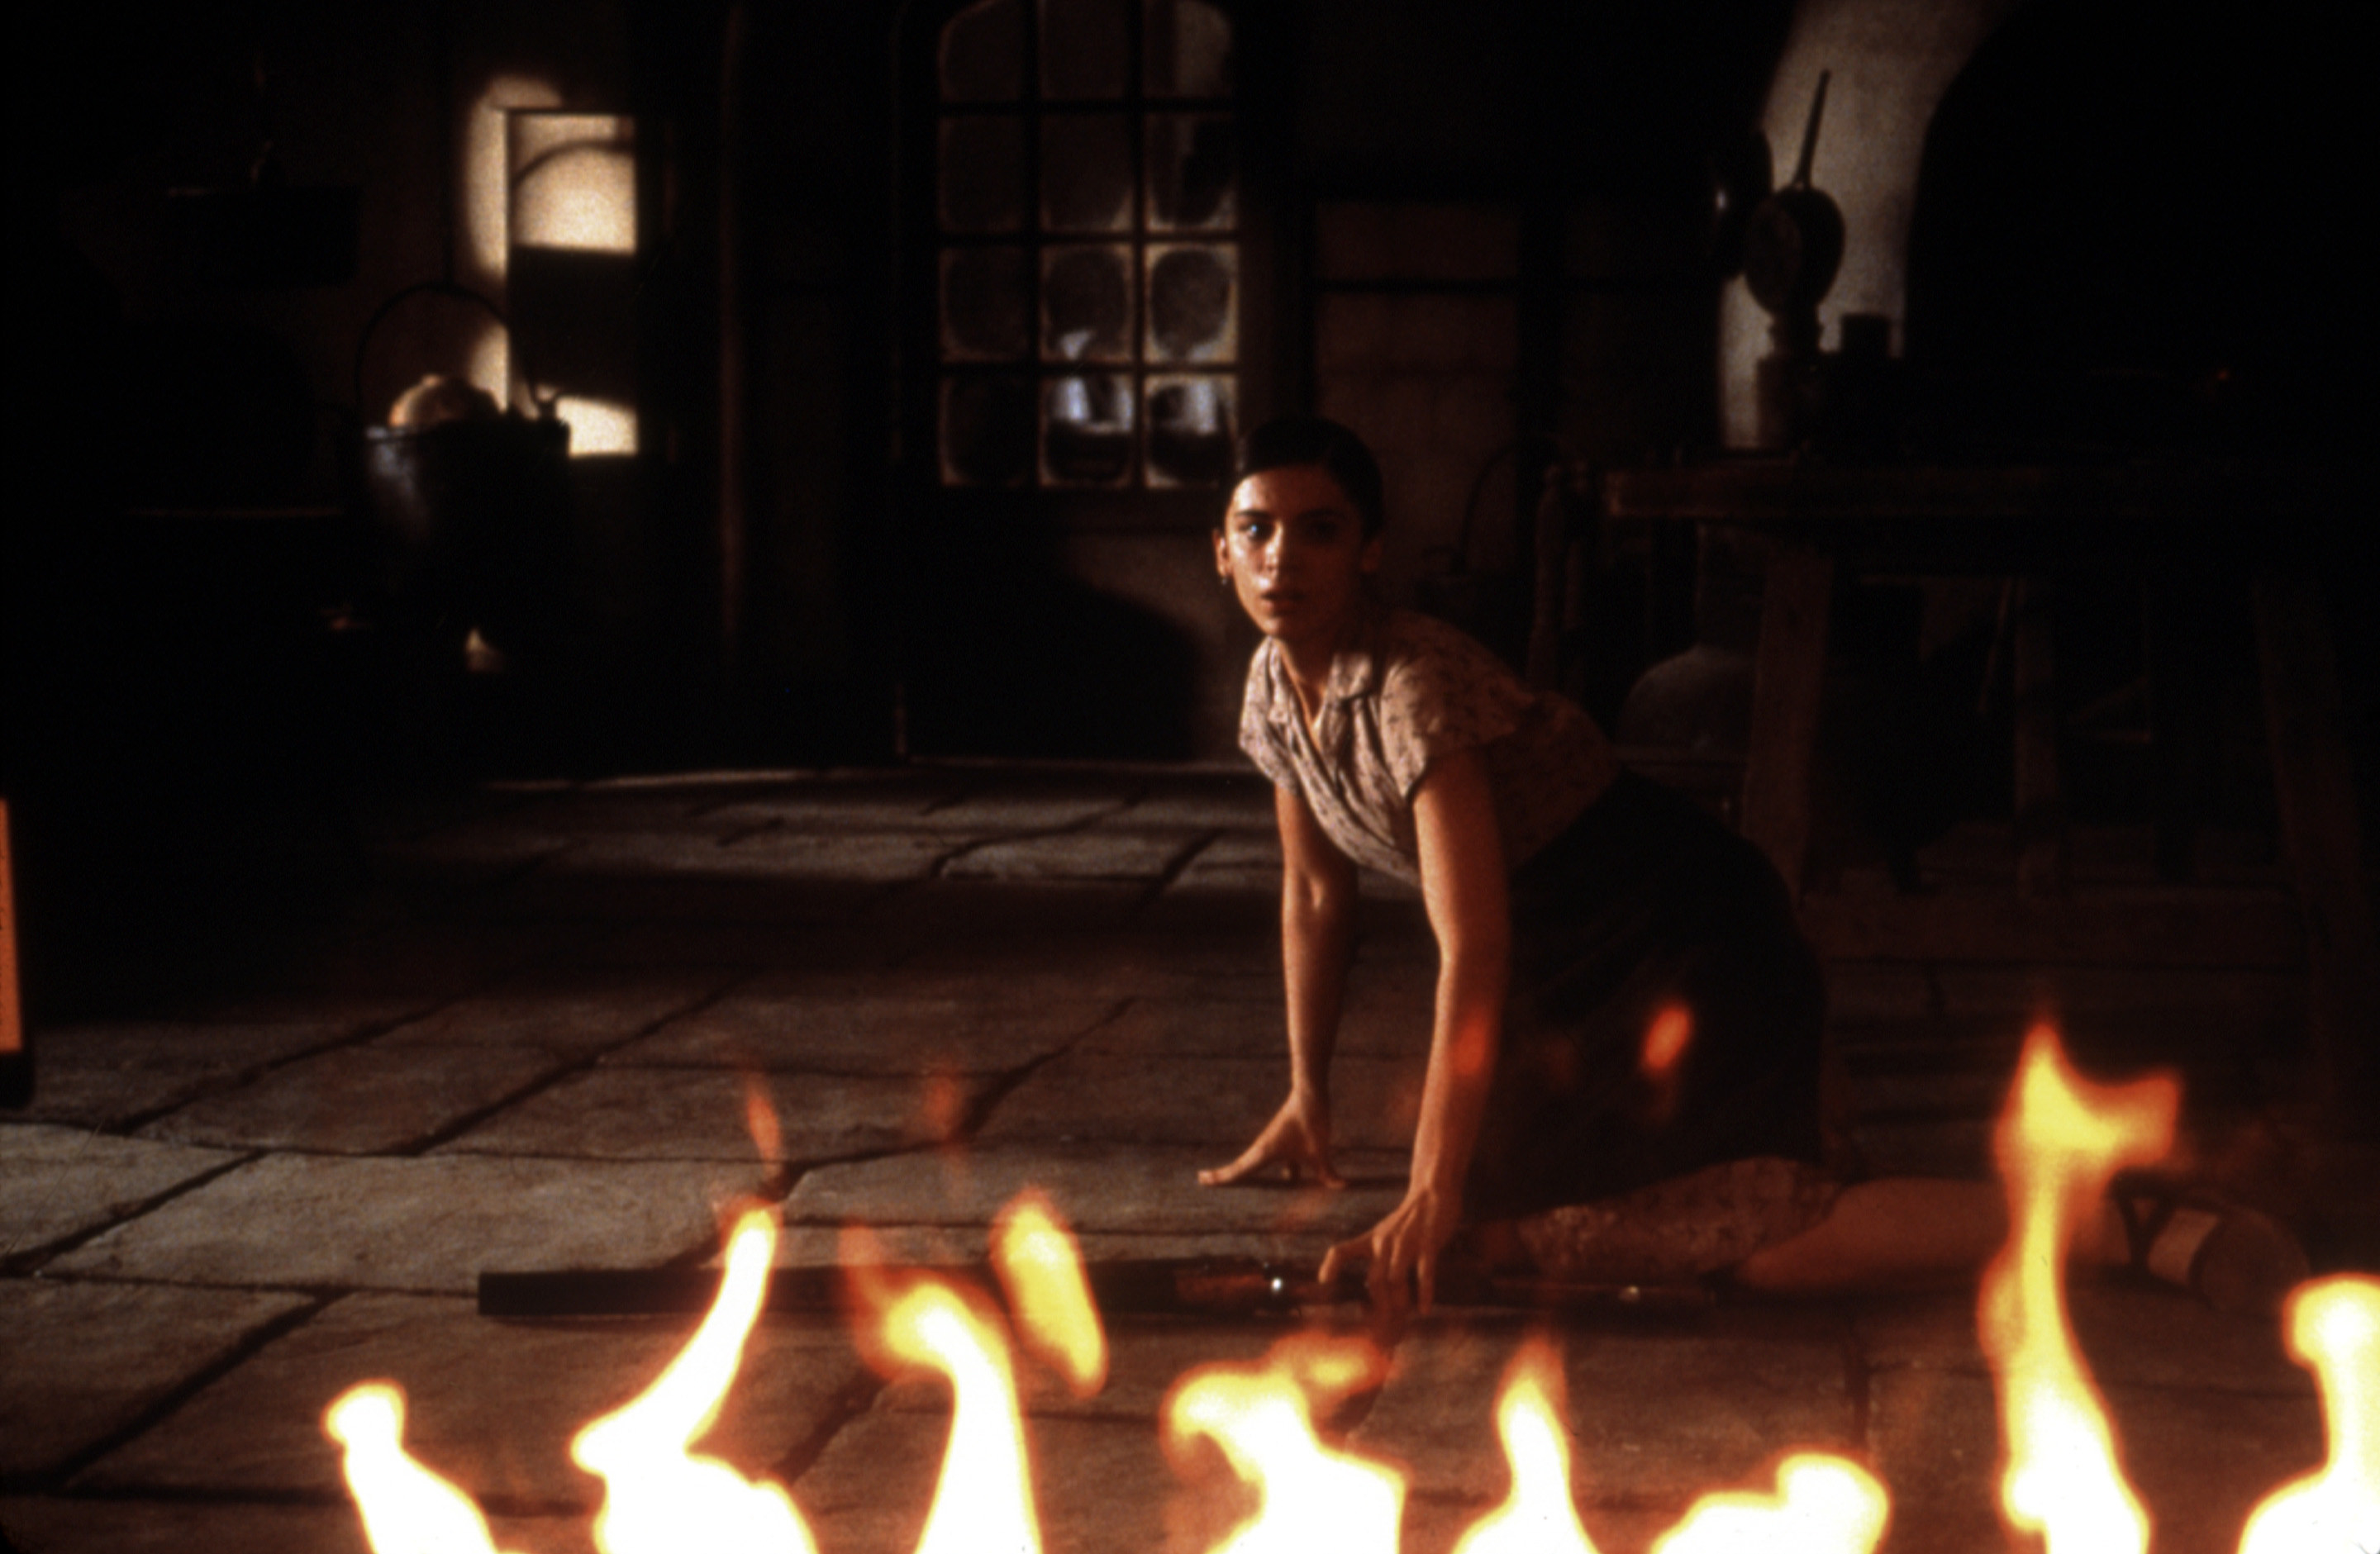 A woman kneeling on the floor, reaching for a rifle as the room goes up in flames around her